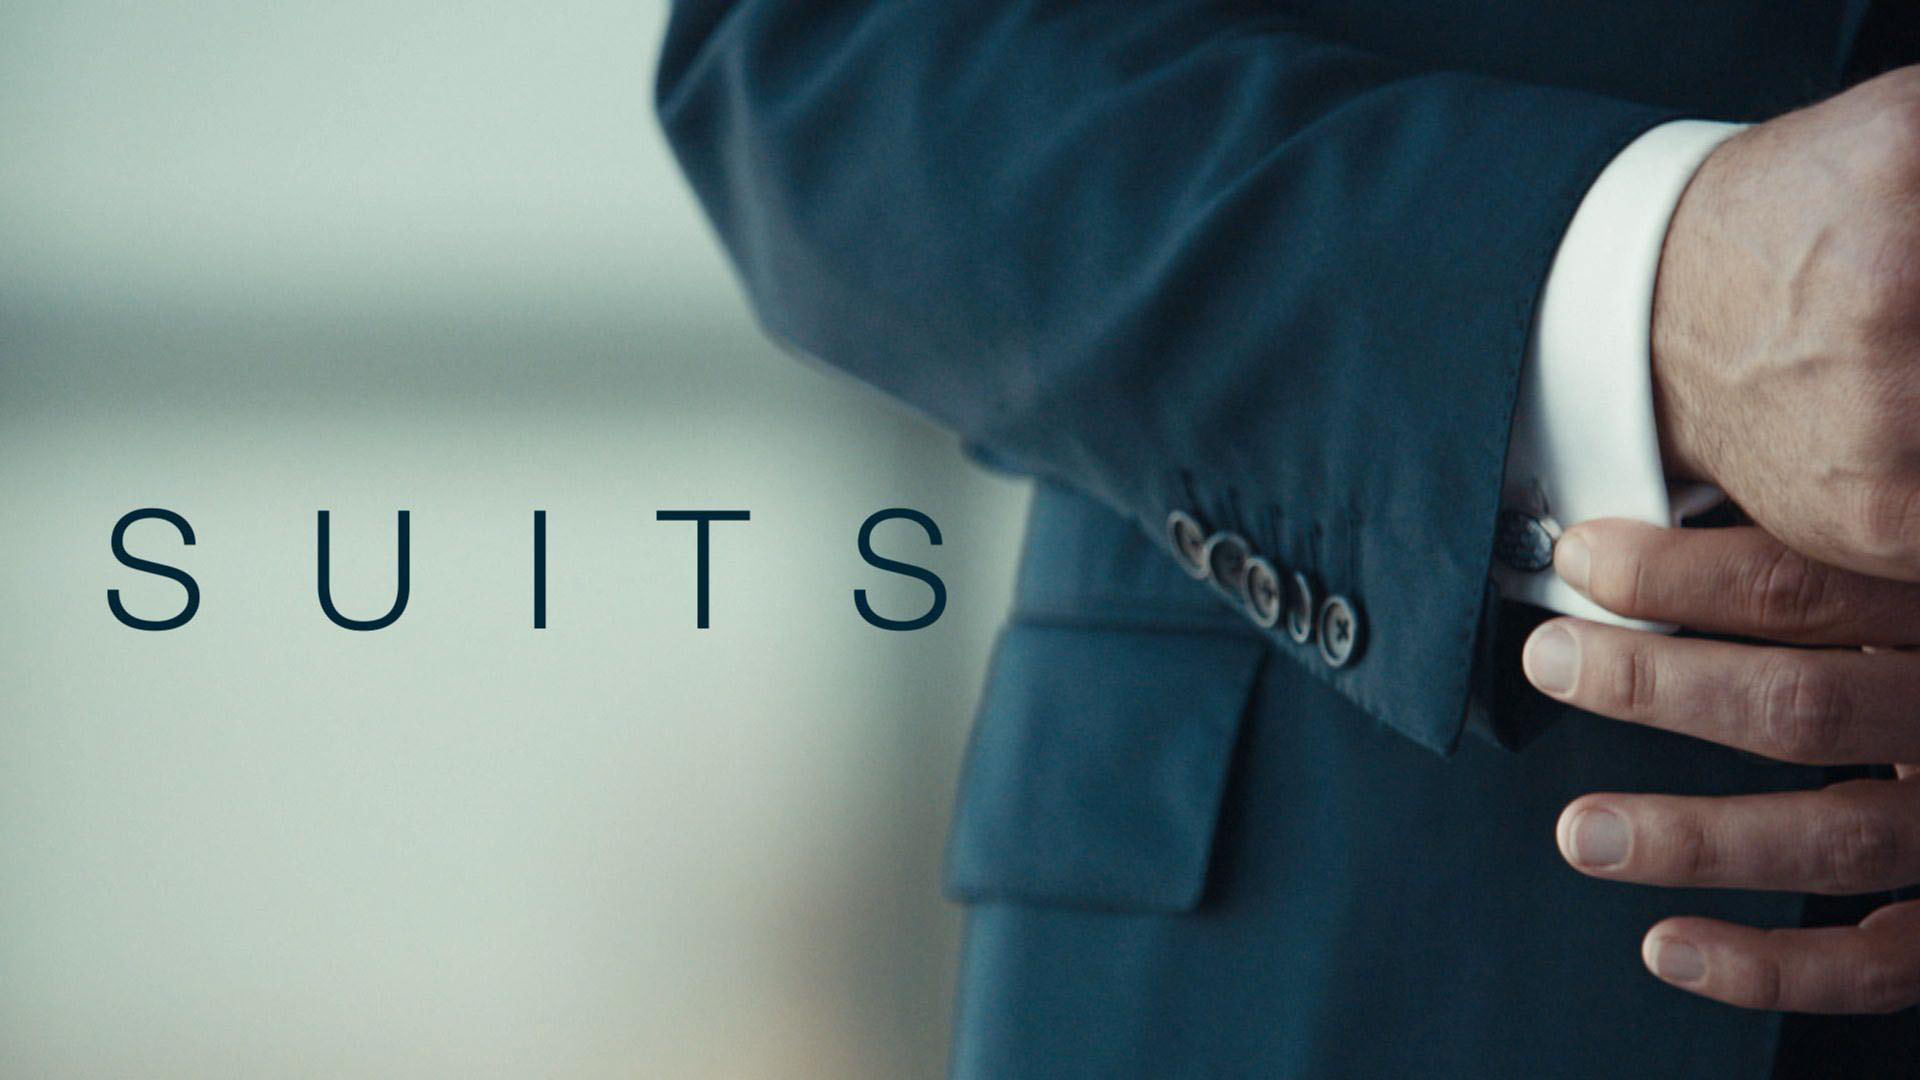 suits wallpaper,product,text,font,hand,arm